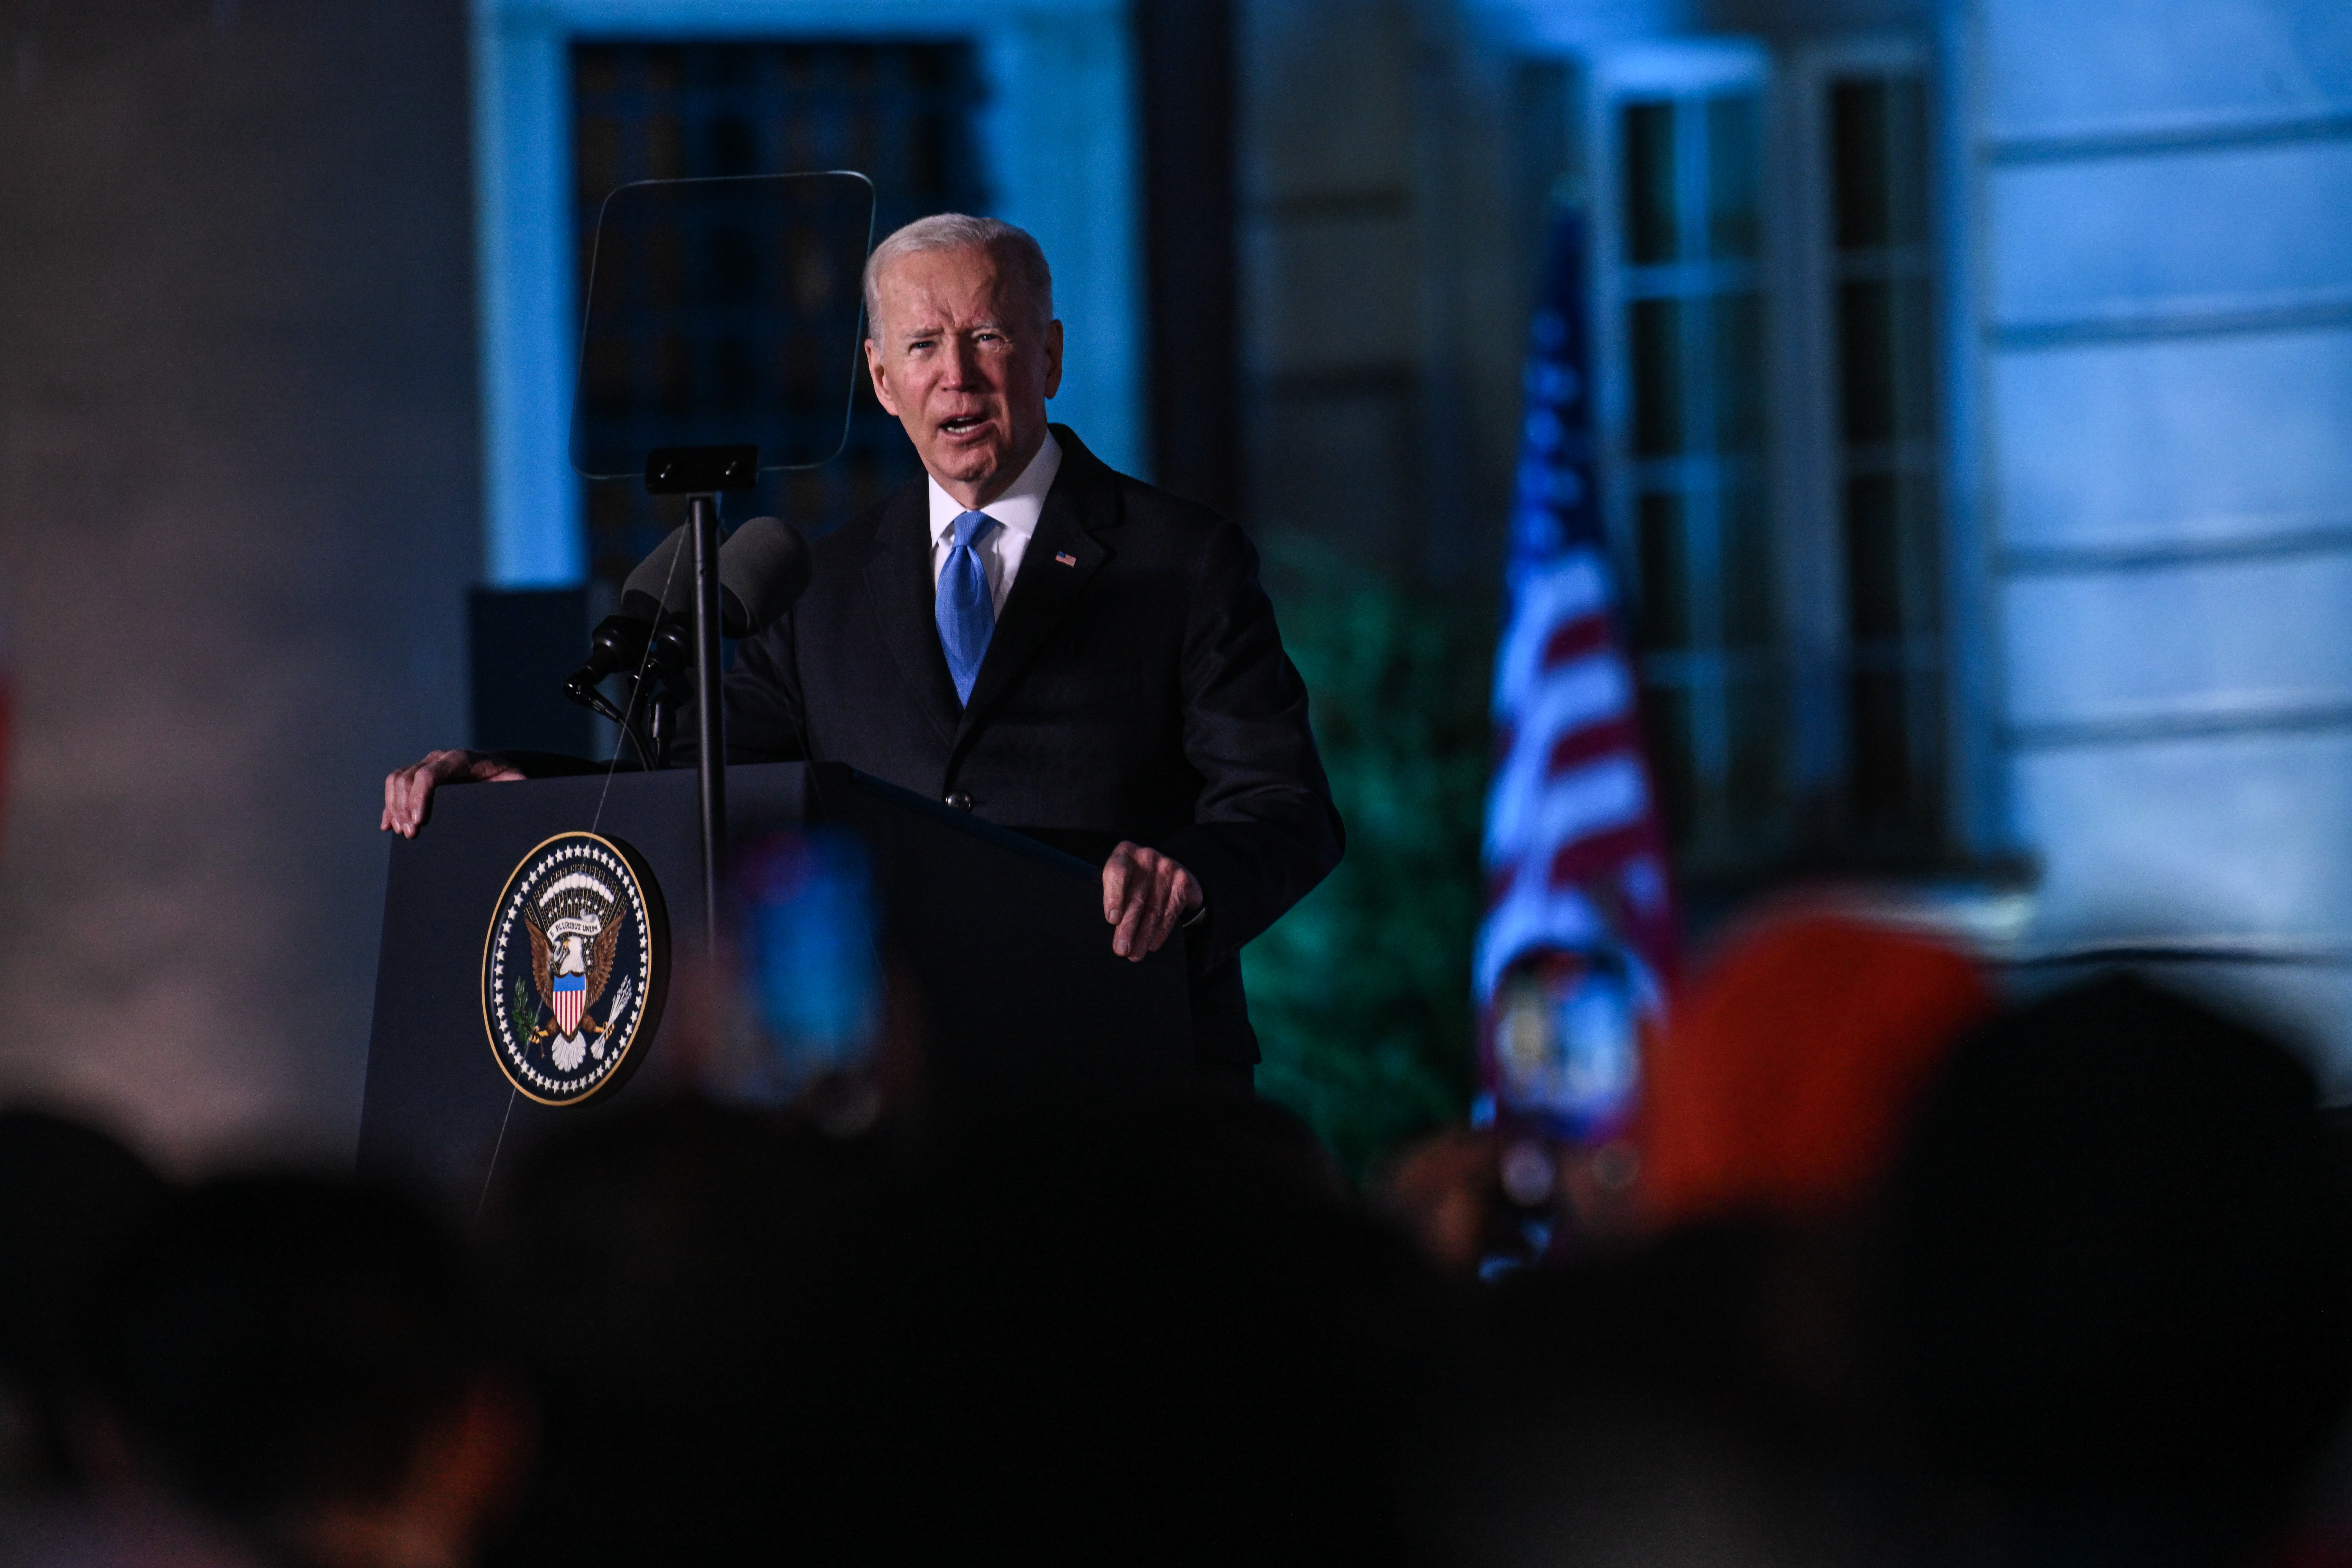 The US President, Joe Biden delivers a speech at the Royal Castle on March 26, 2022 in Warsaw, Poland. (Photo by Omar Marques/Getty Images)